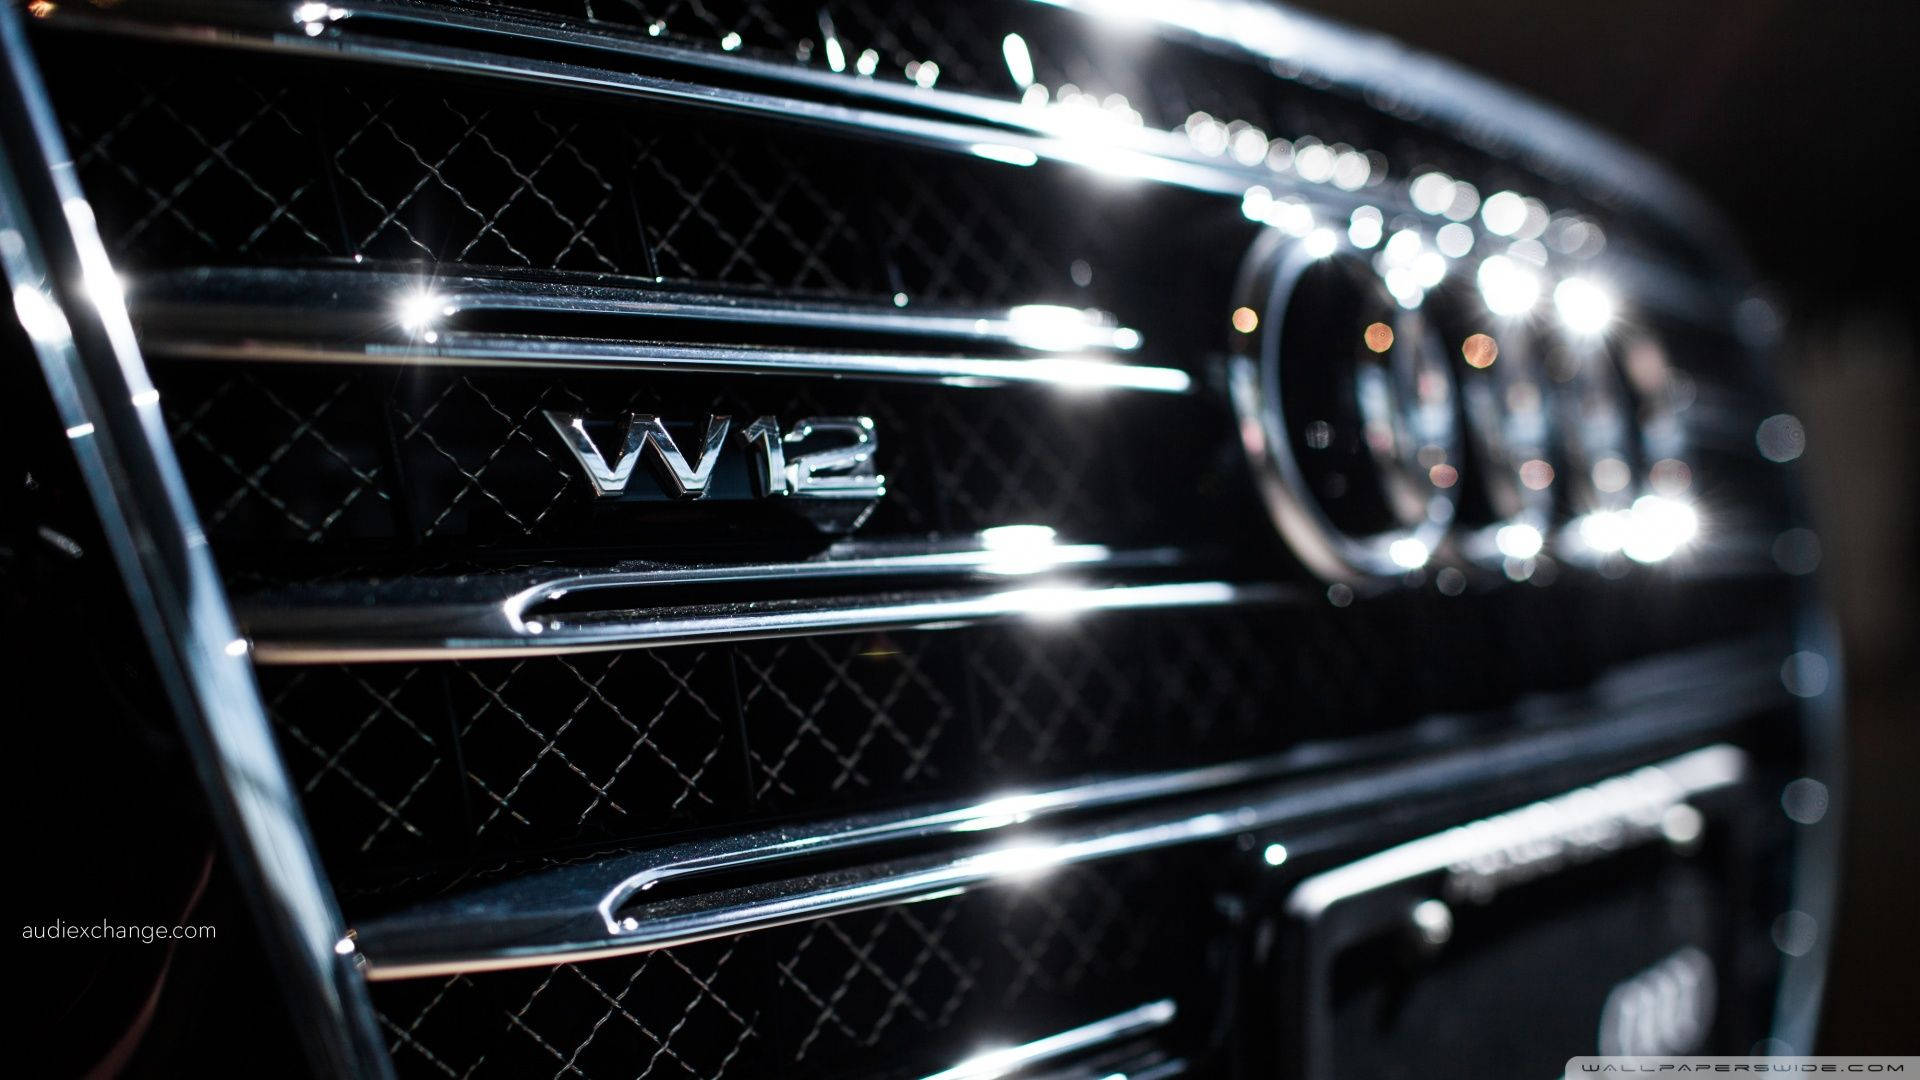 2012 Audi A8 W12 Badge And Grille Background